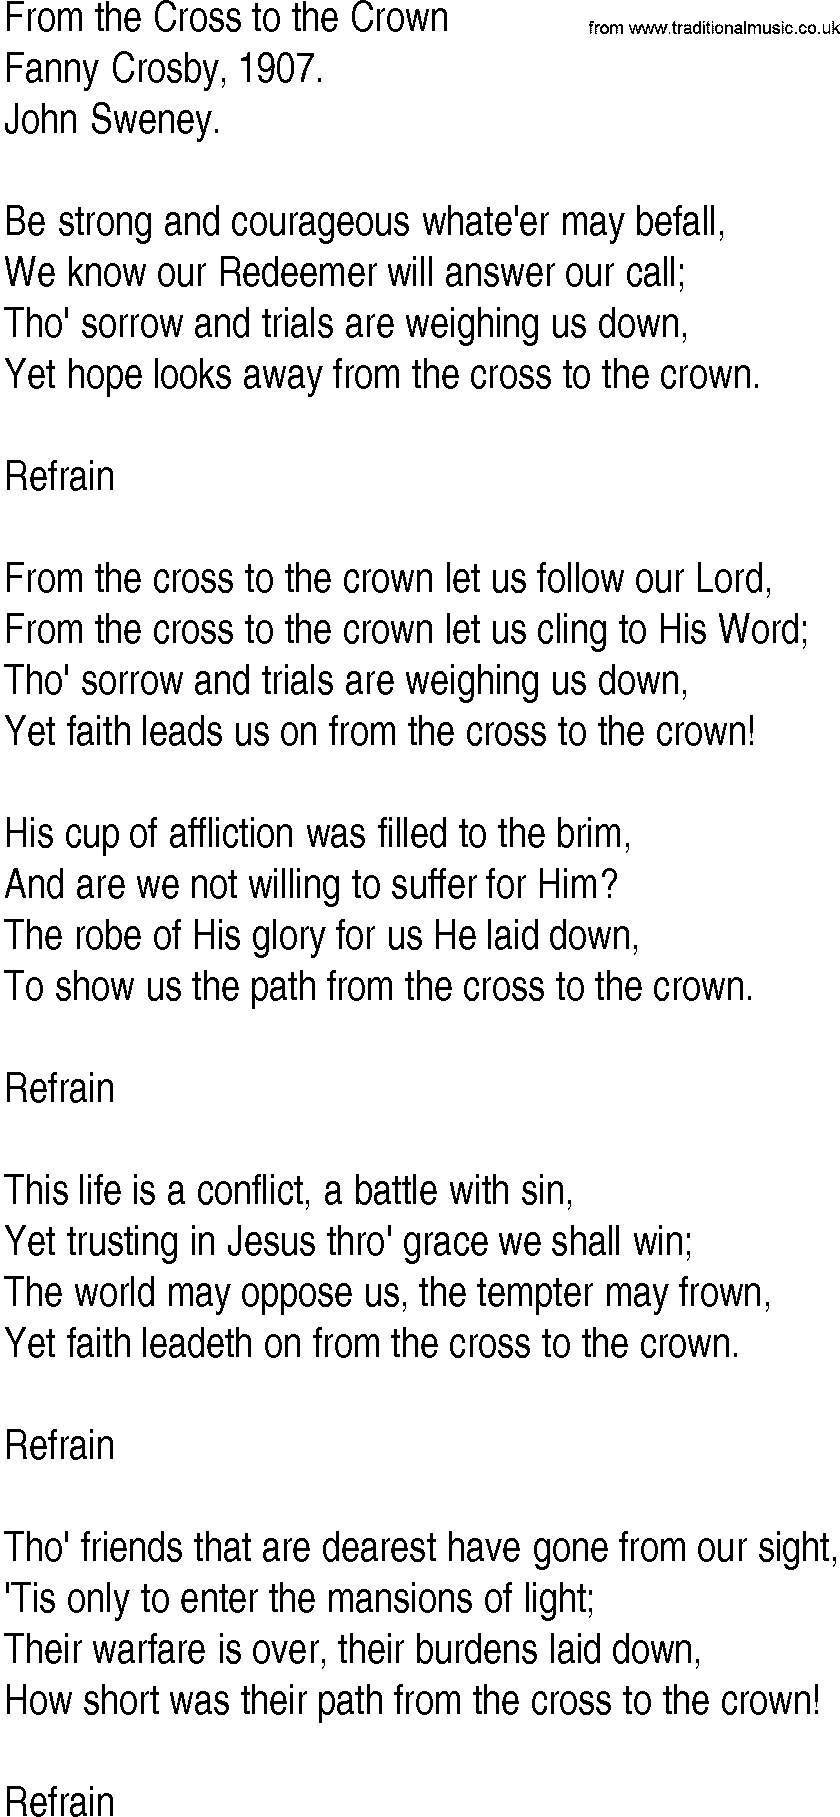 Hymn and Gospel Song: From the Cross to the Crown by Fanny Crosby lyrics